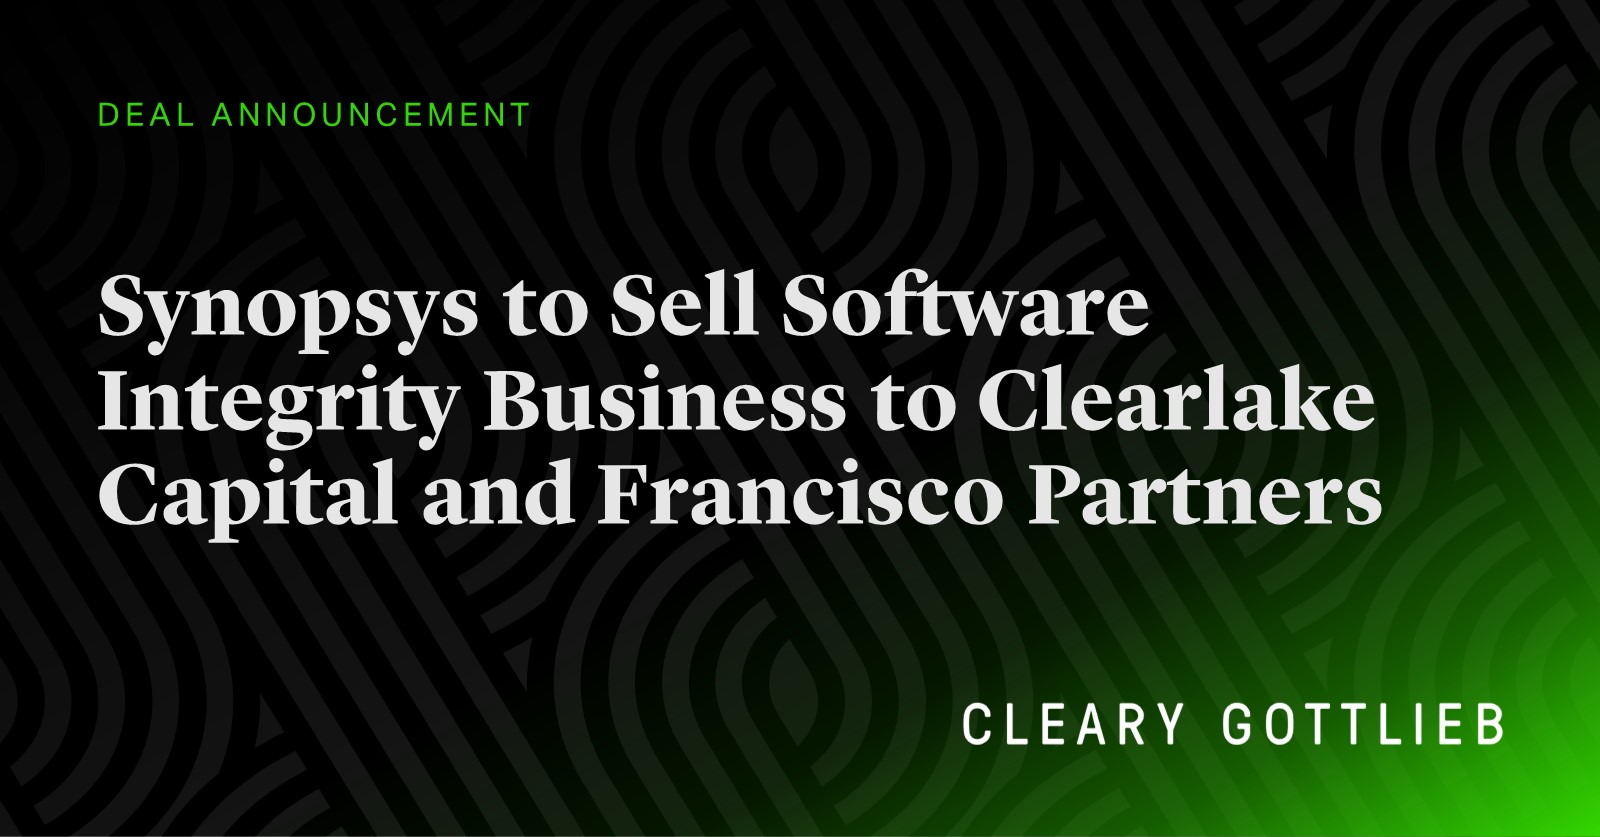 Synopsys to Divest Software Integrity Business to Clearlake Capital and Francisco Partners